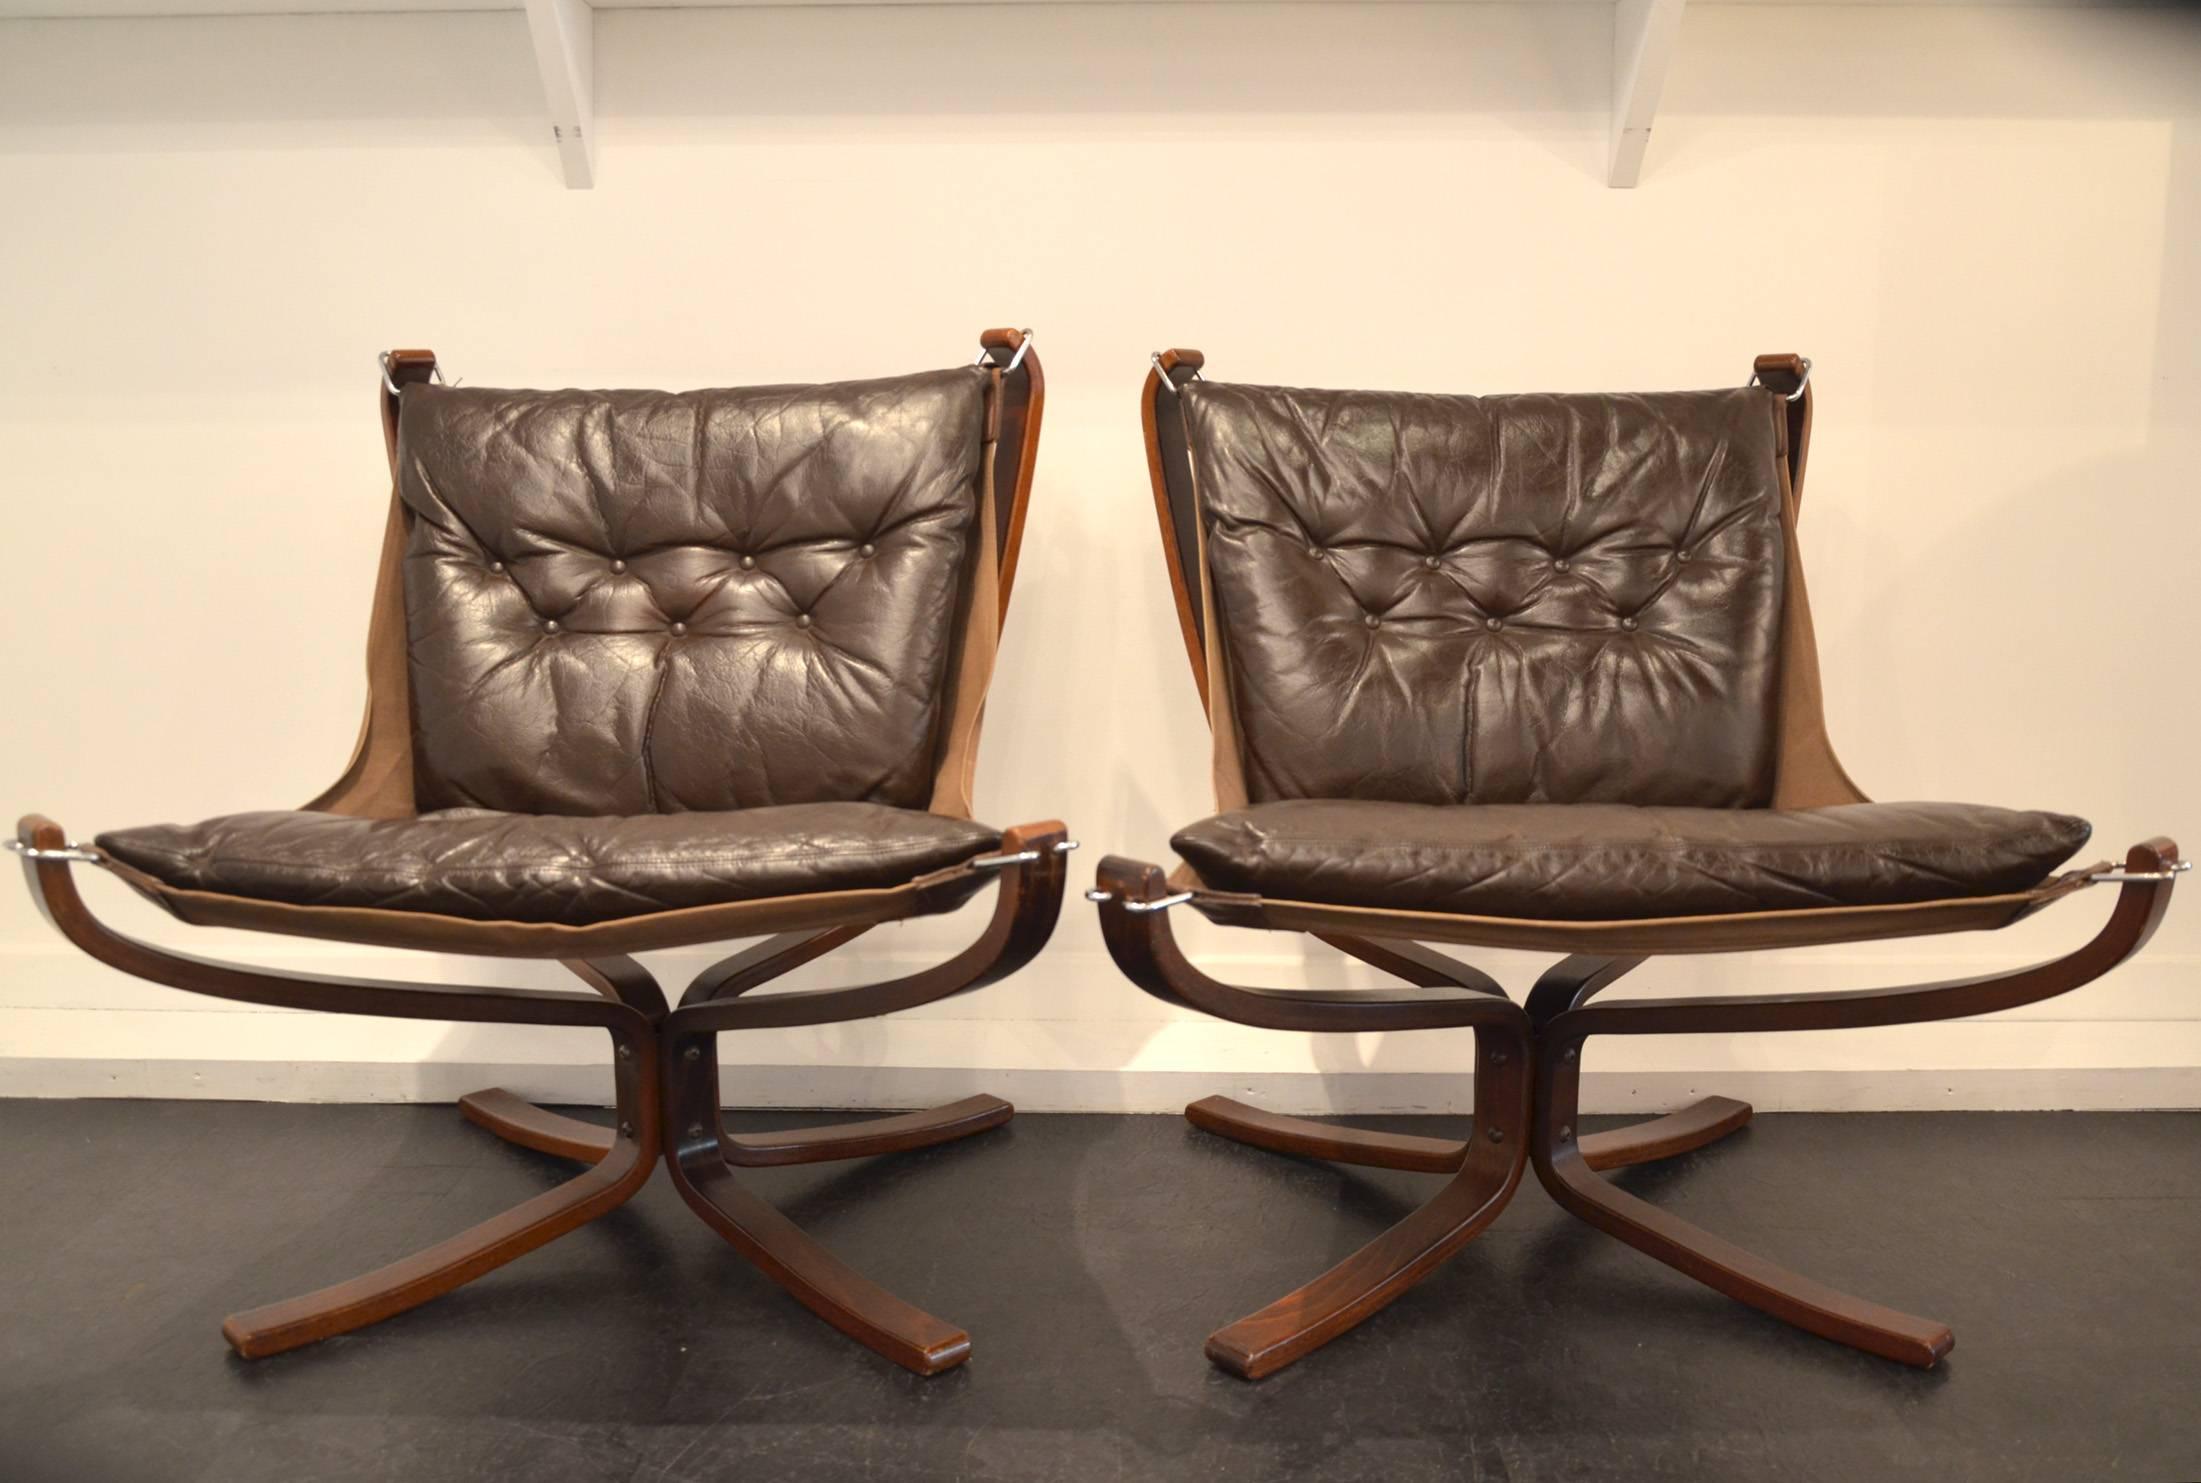 Pair of Sigurd Ressel Falcon chairs for Vatne Mobler.